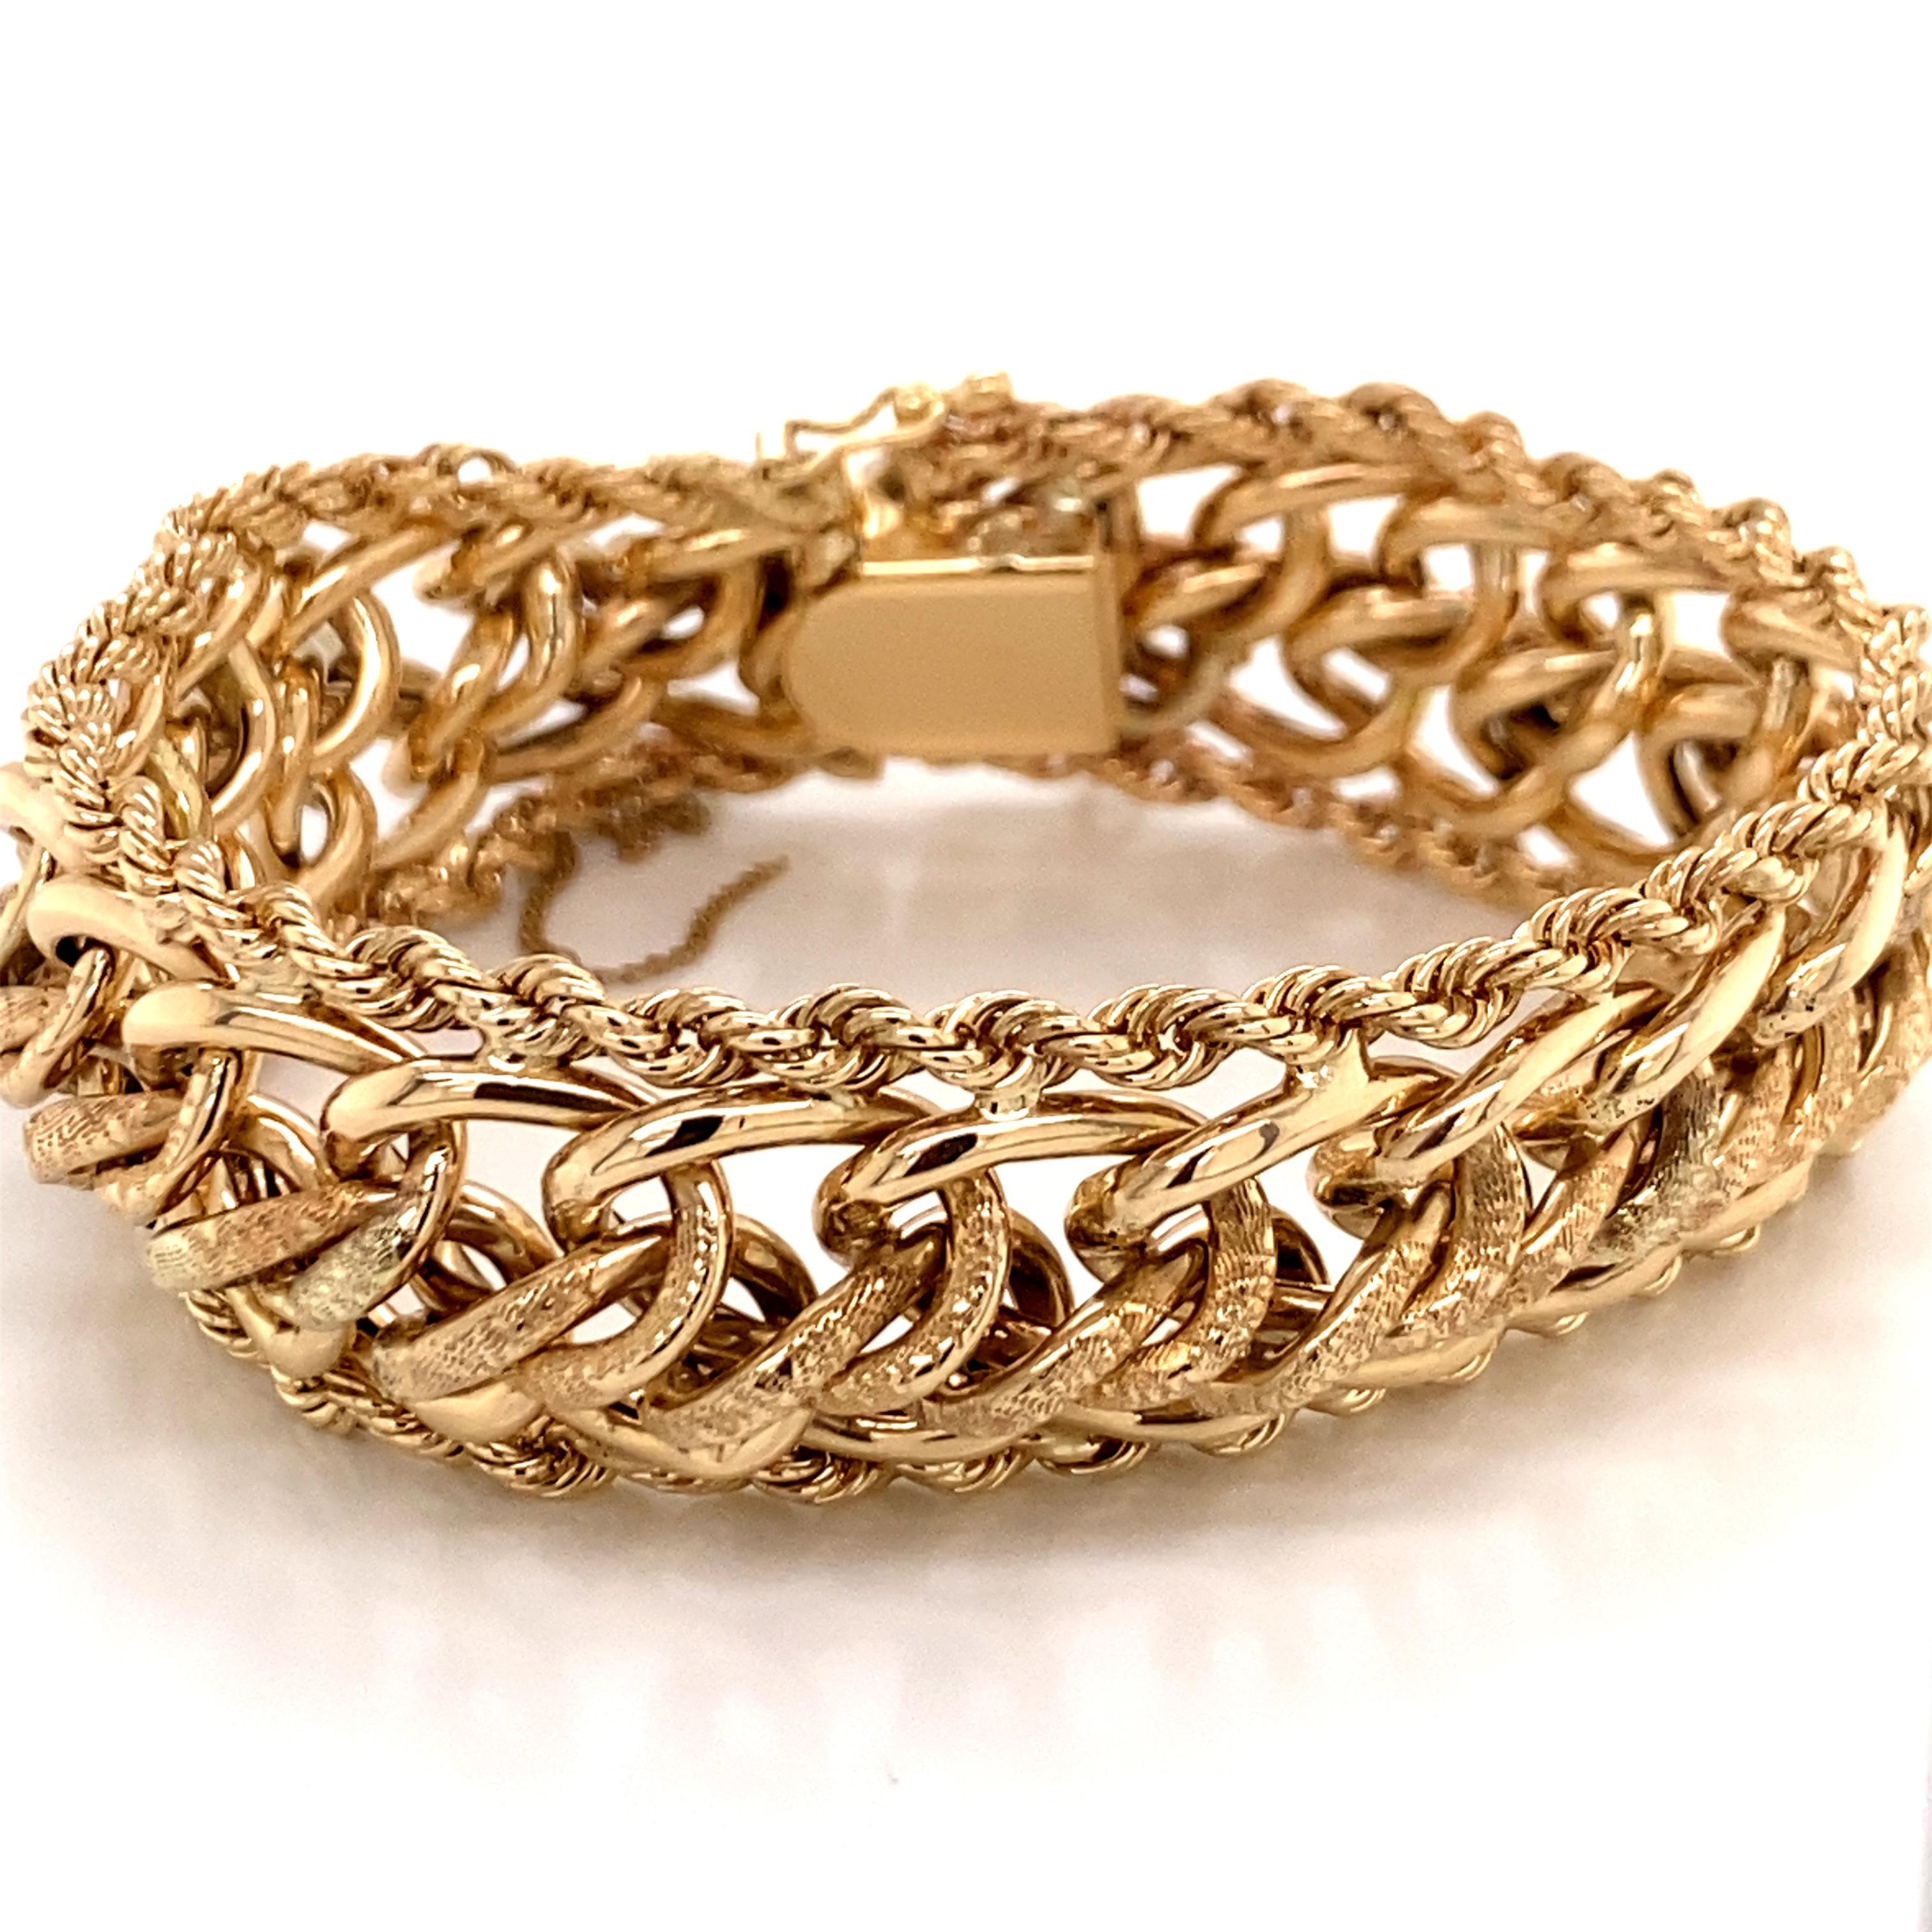 Retro 1960s 14 Karat Yellow Gold Wide Charm Link Bracelet with Rope Edge For Sale